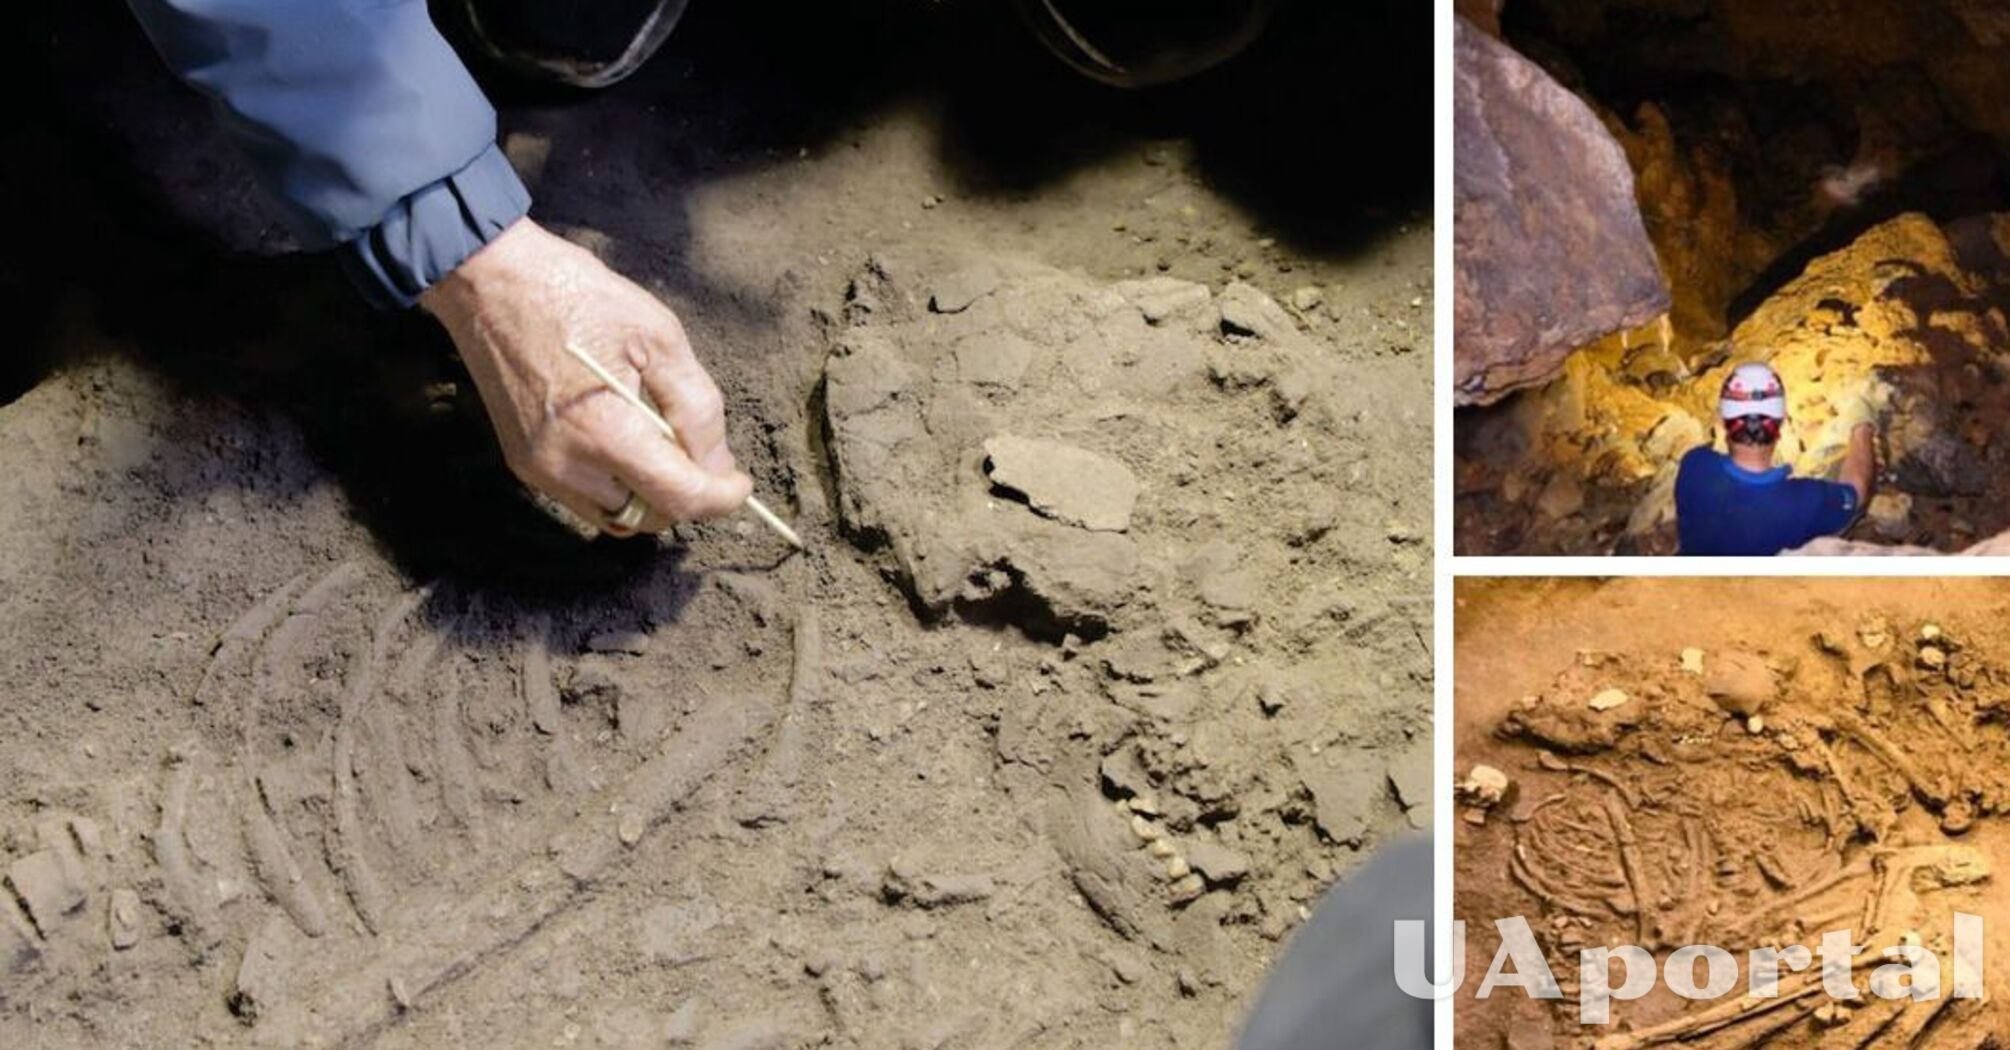 10,000-year-old human remains discovered in Vietnam for the first time (photo)